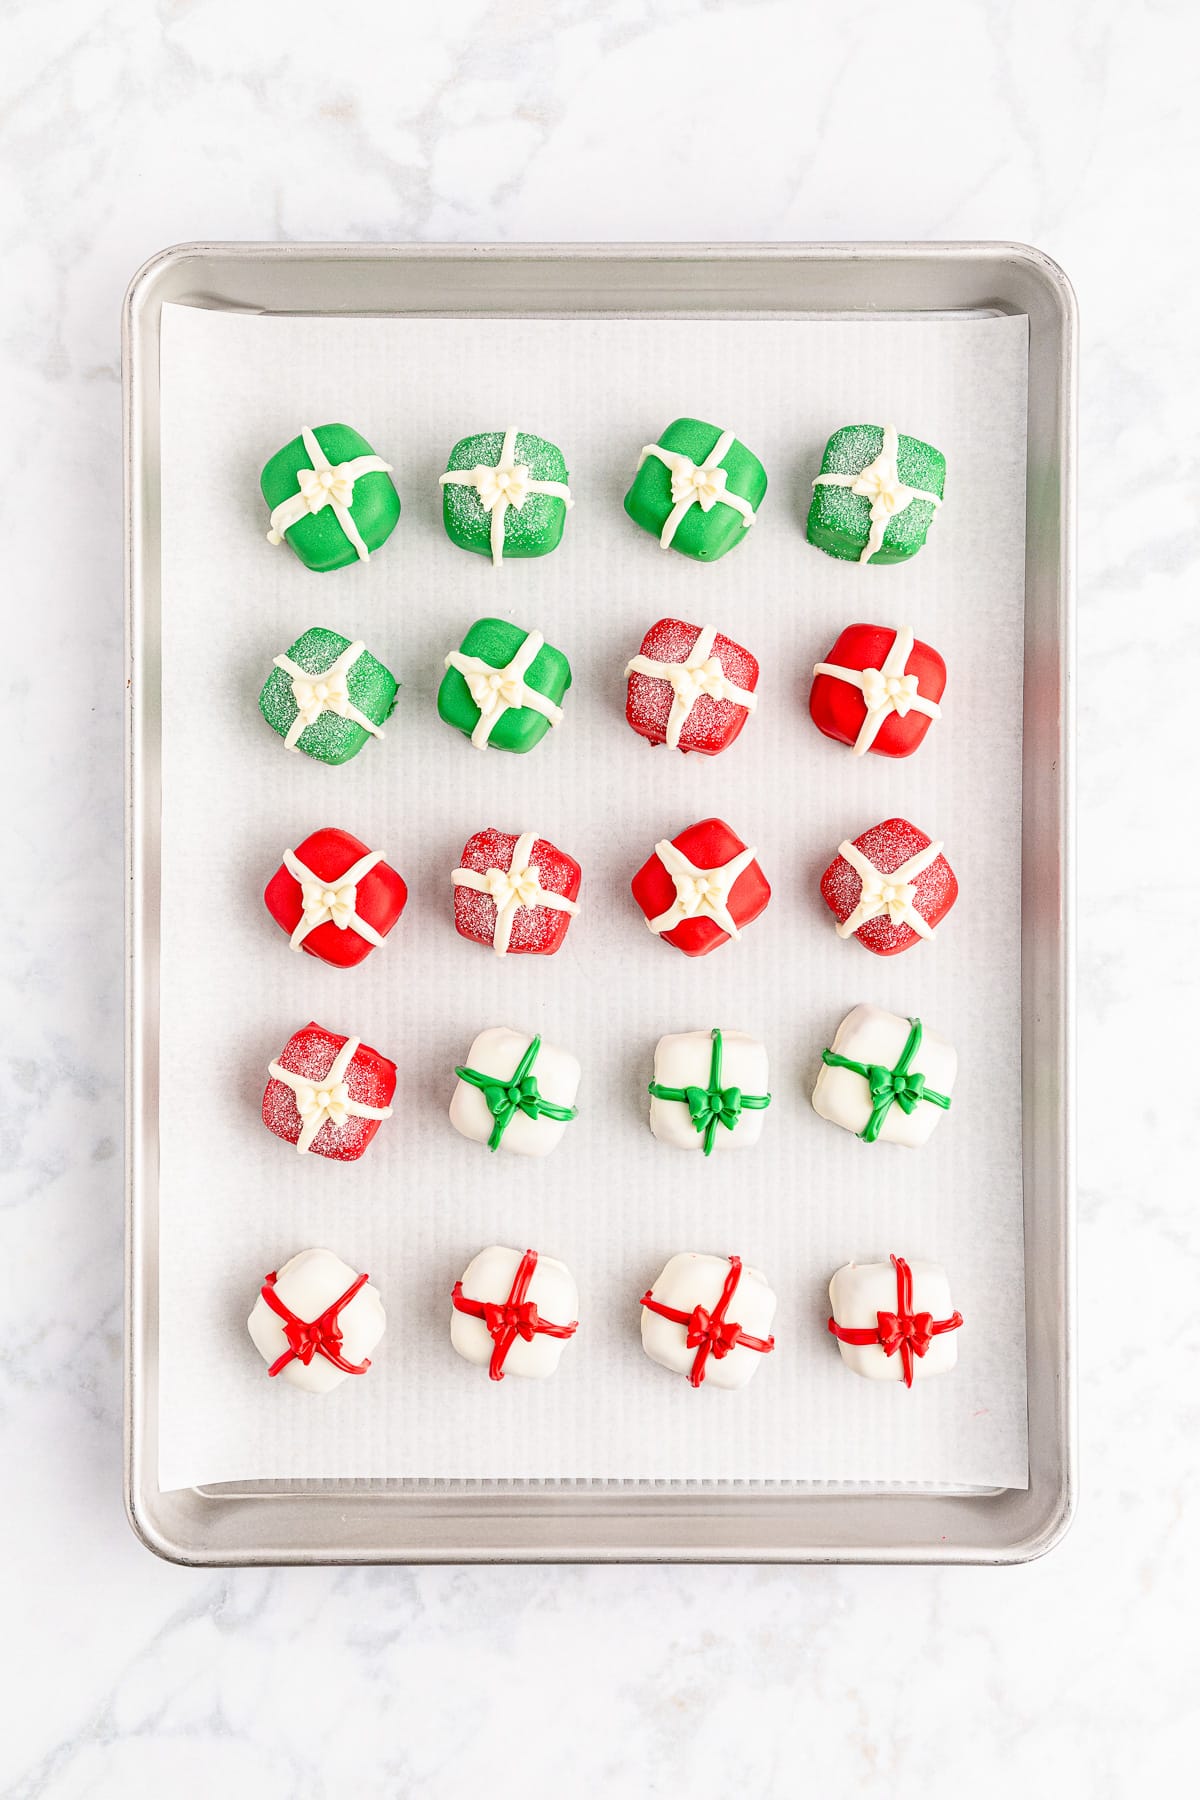 Christmas present chocolate truffles on a baking sheet with red, green, and white ribbon stripes after decorating.